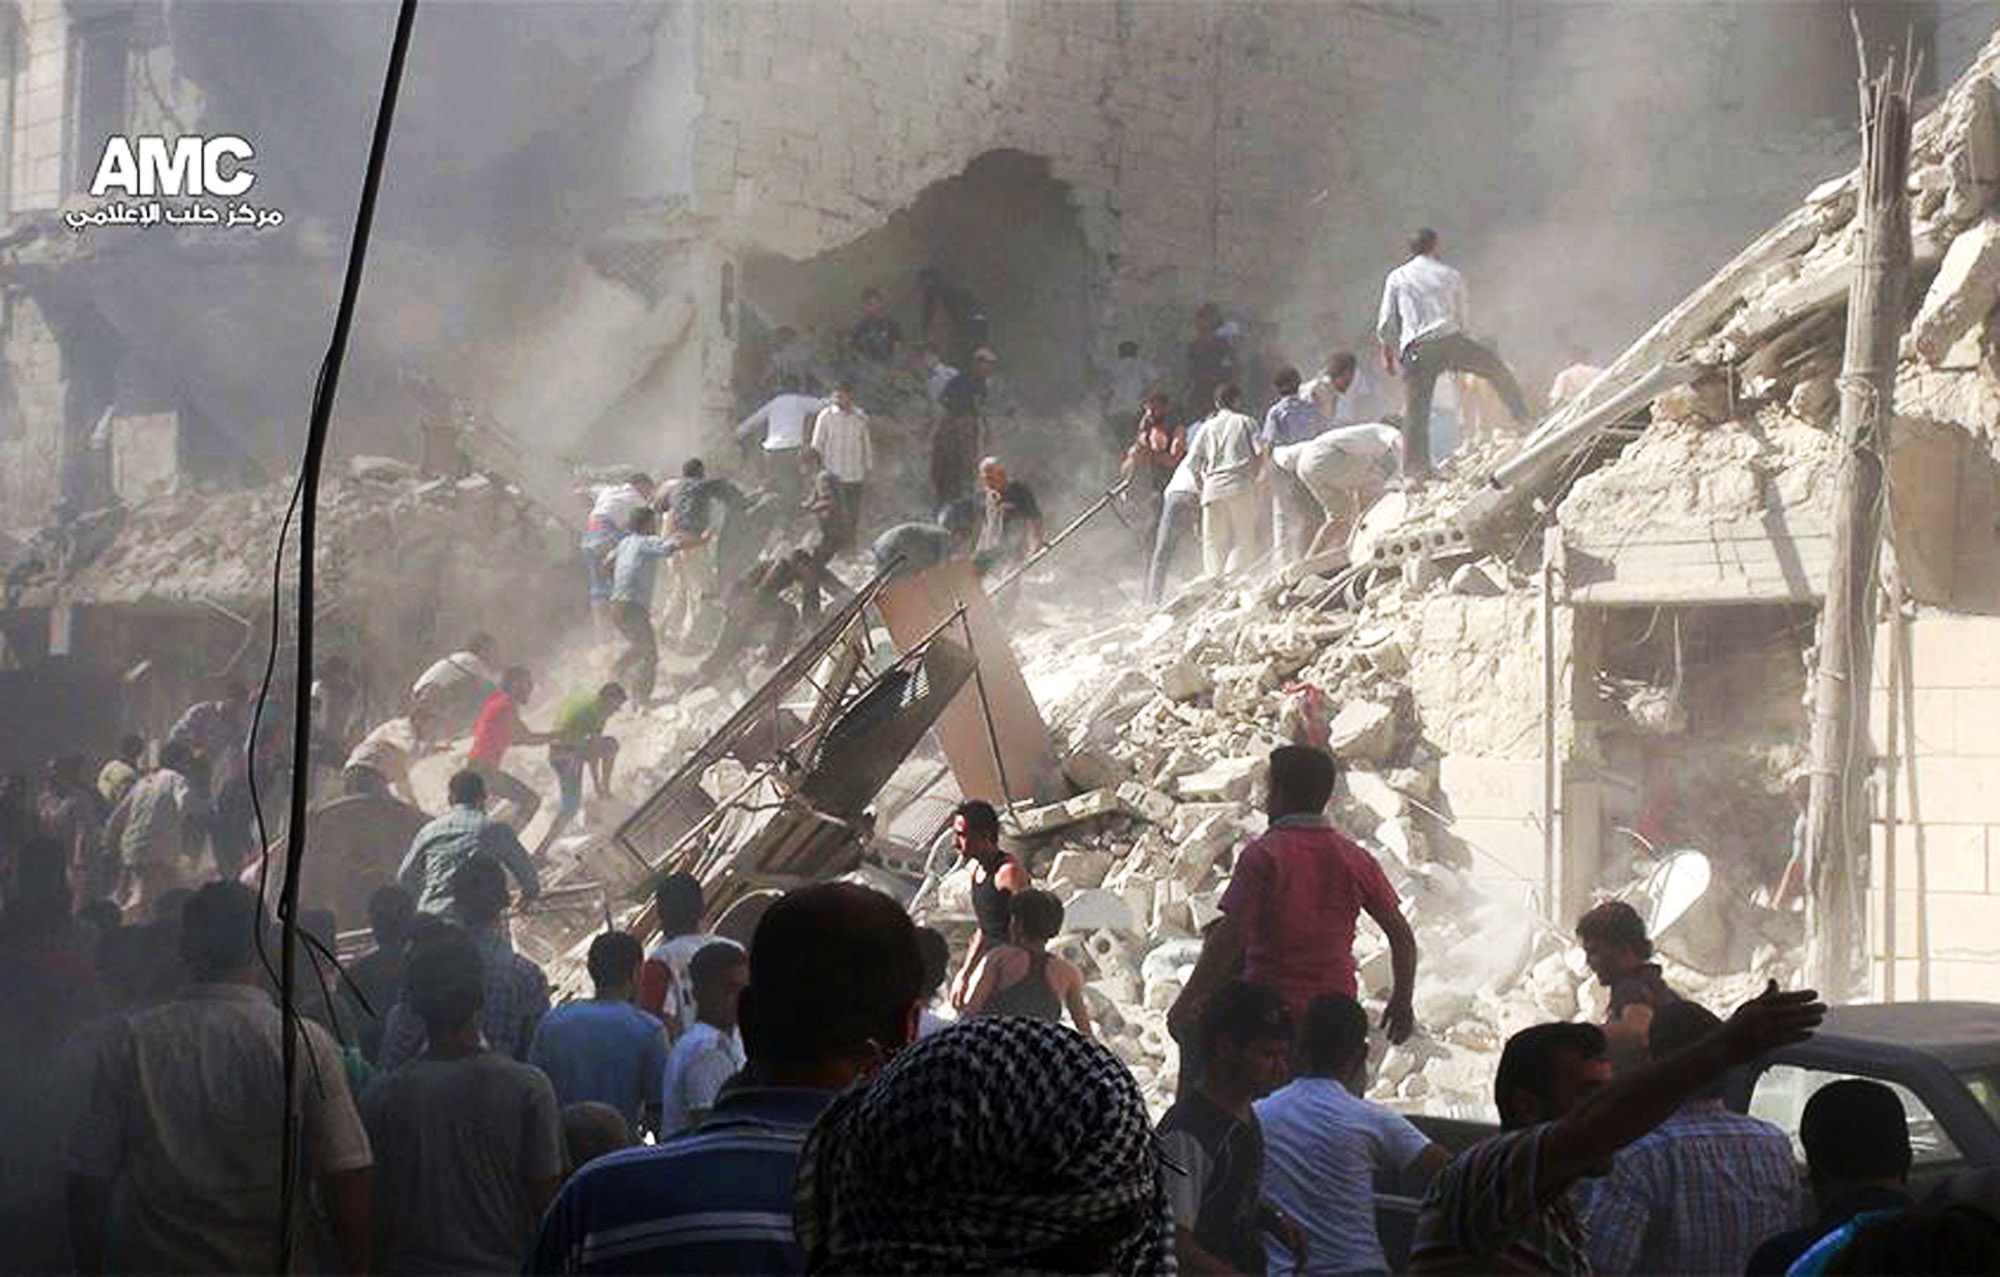 Syrians inspect the rubble of damaged buildings due to heavy shelling by Syrian government forces in Aleppo, Syria, on Monday.